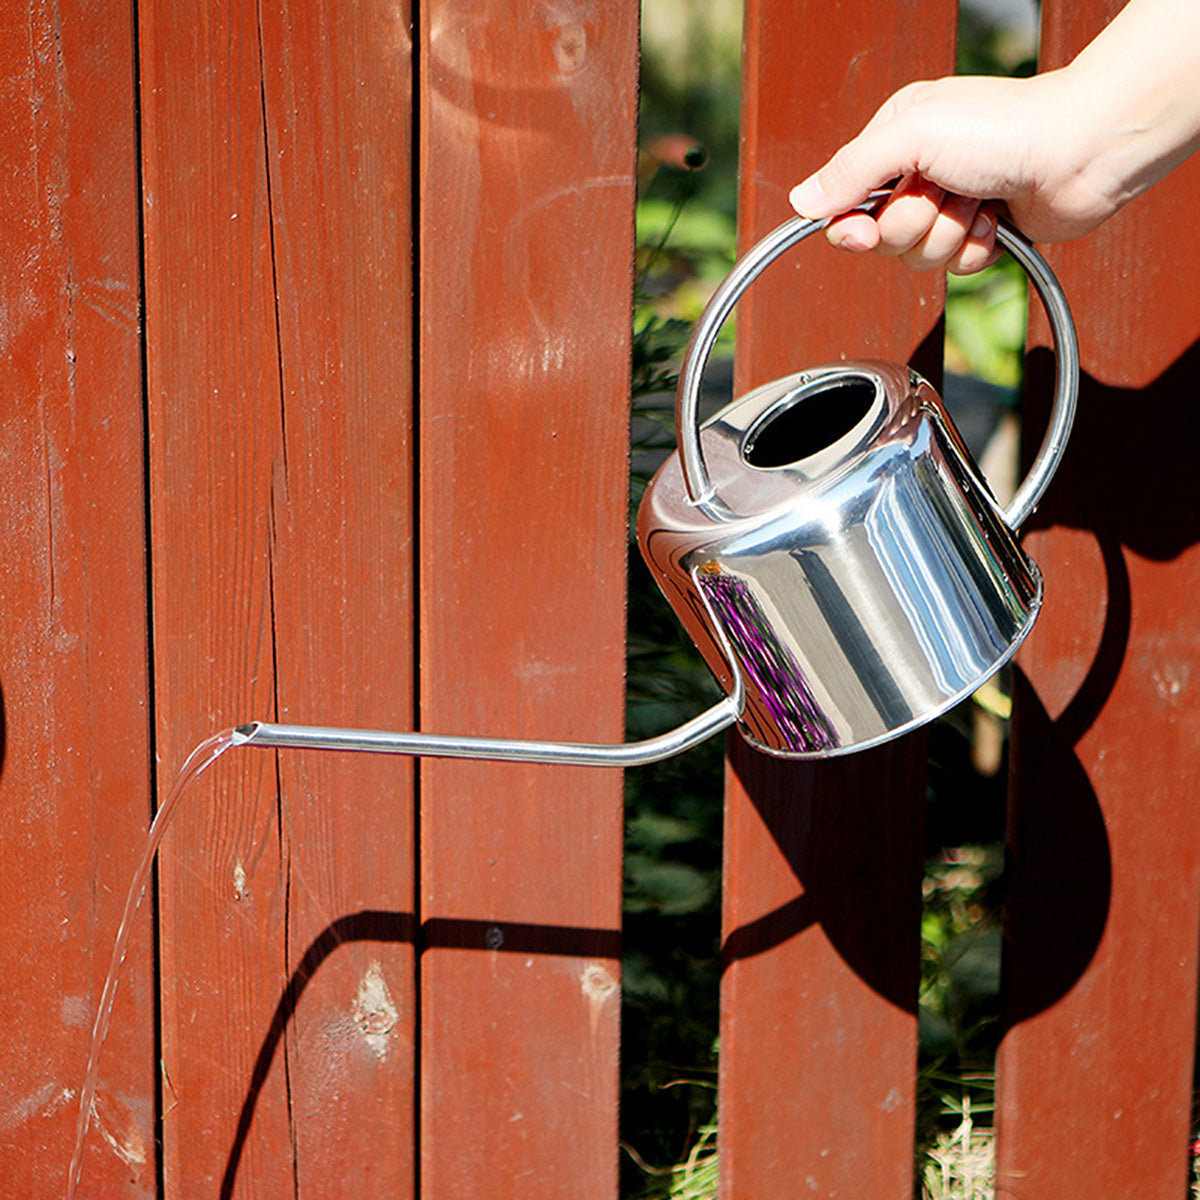 Ferry-Morse Stainless Steel 1.5L Watering Can